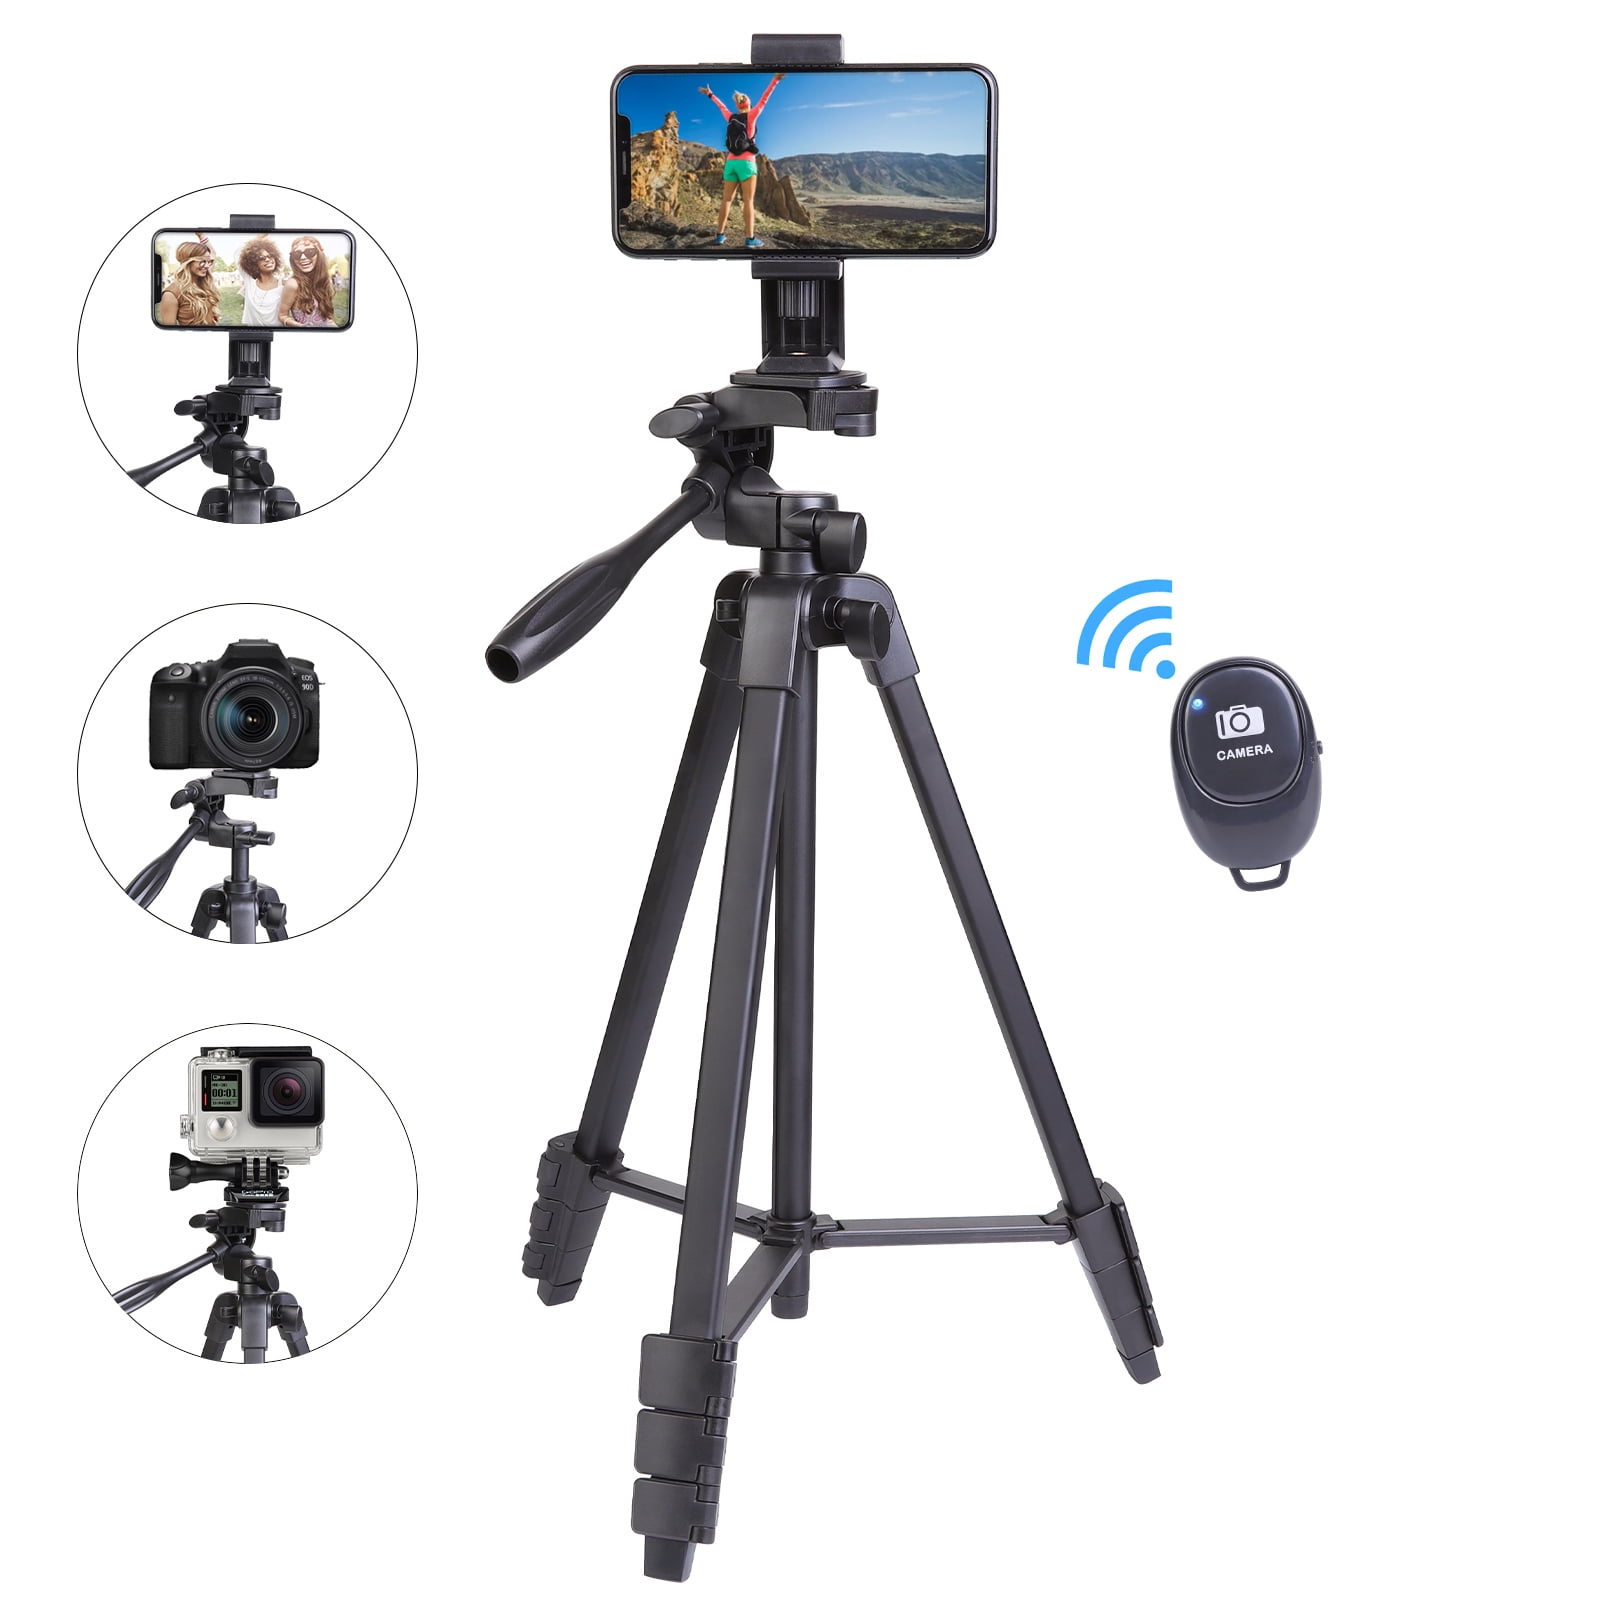 Mini Camera GoPro Phone Tripod,Portable and Adjustable Tripod Stand Holder with Bluetooth Remote,Compatible with iPhone&Android